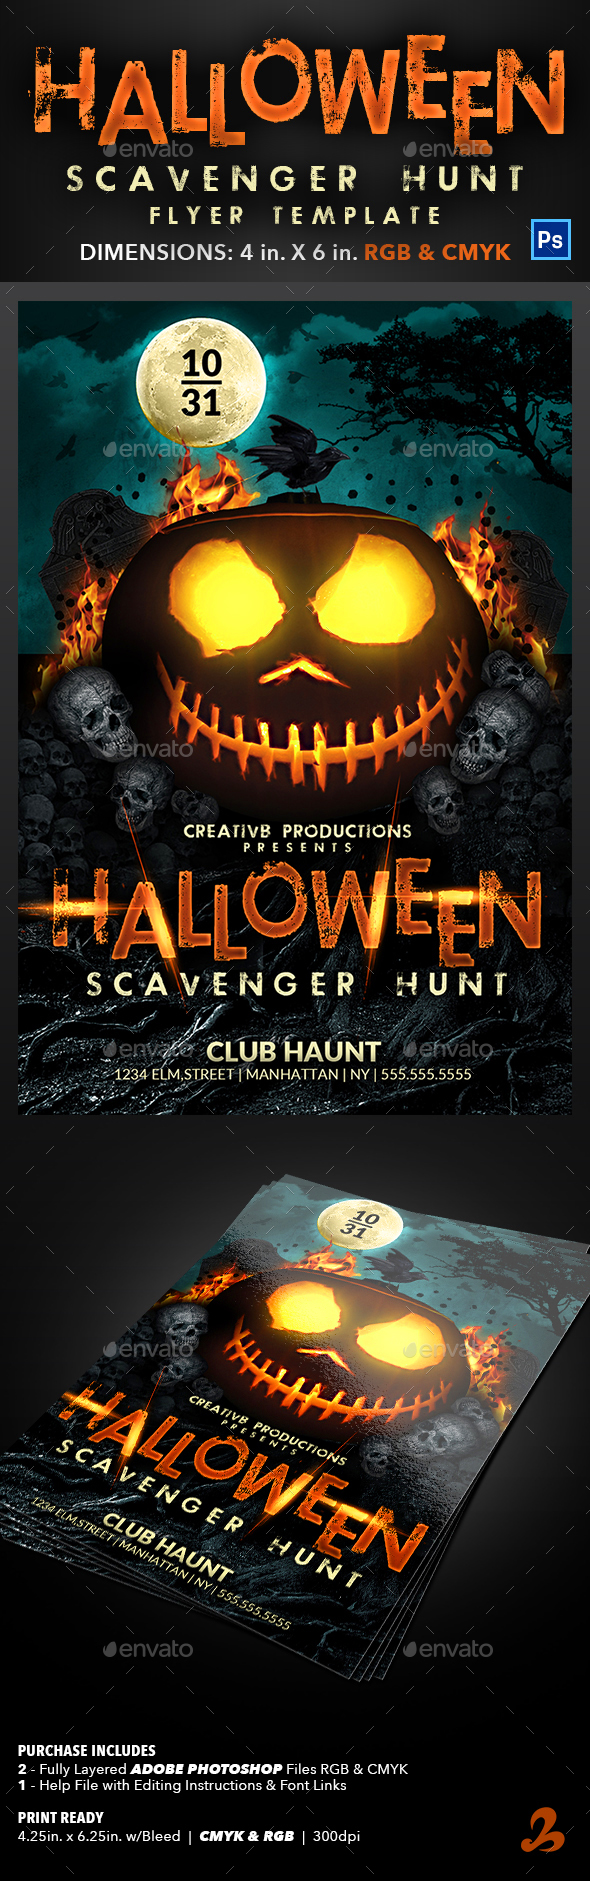 Halloween Scavenger Hunt Flyer Template by CreativB GraphicRiver